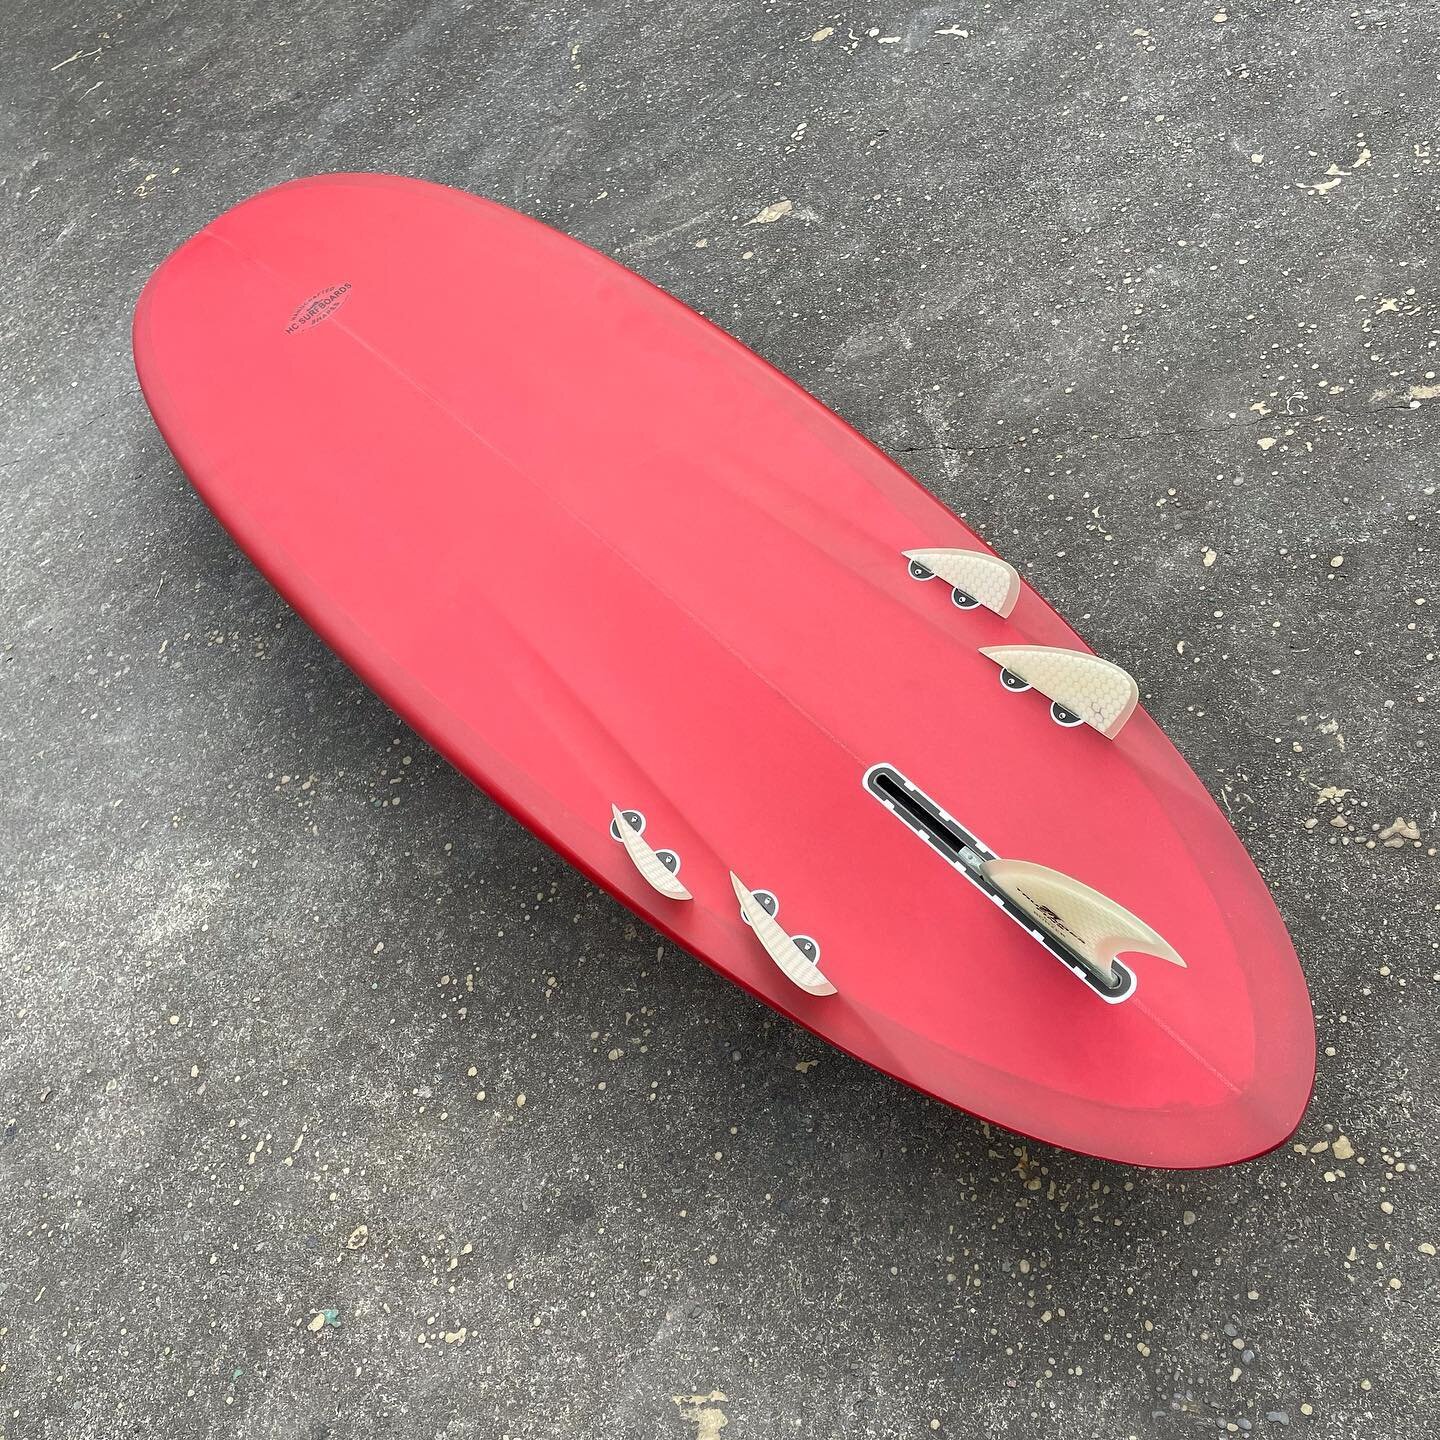 7&rsquo;0&rdquo; Bonzer for @domboothroyd this board is inspired by the @campbellbros Dom has had a lot of Bonzers from many different shapers, let&rsquo;s hope this one meets his expectations!! He is off to Gland with it to test it out. Hope you hav